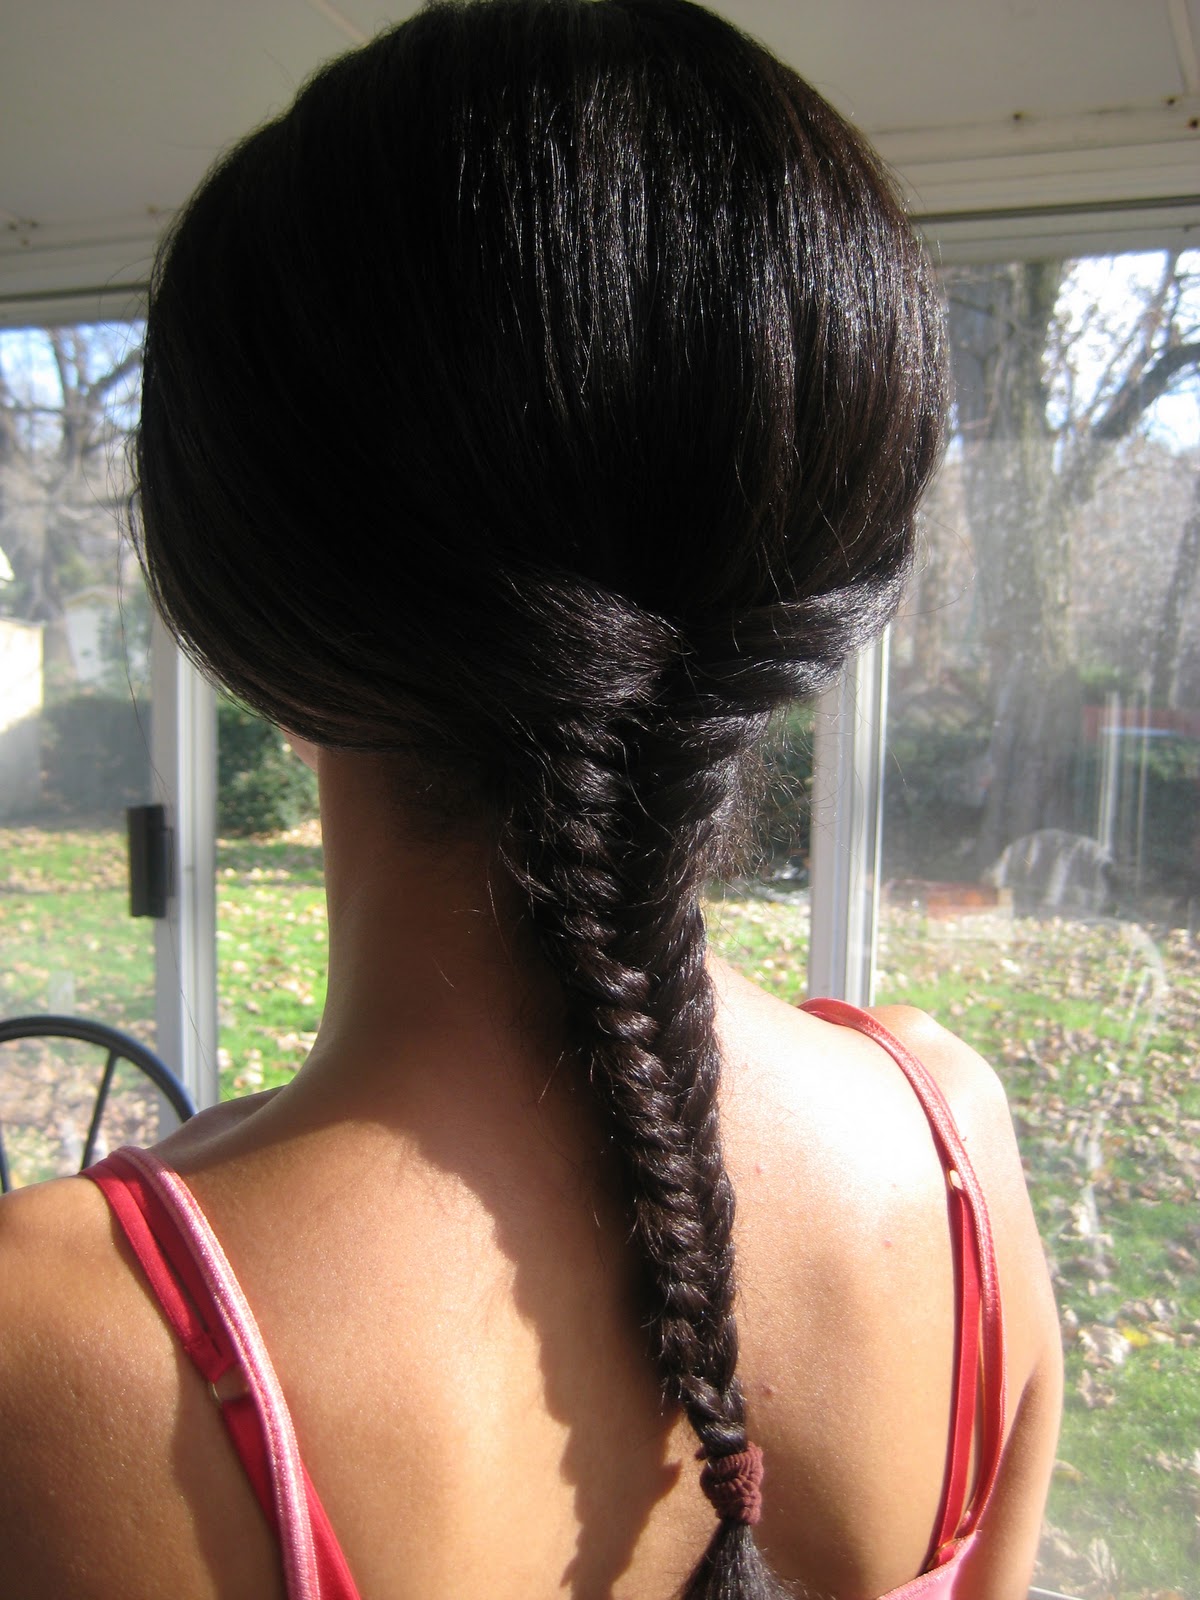 Forhisglory natural: my first fishtail braid!